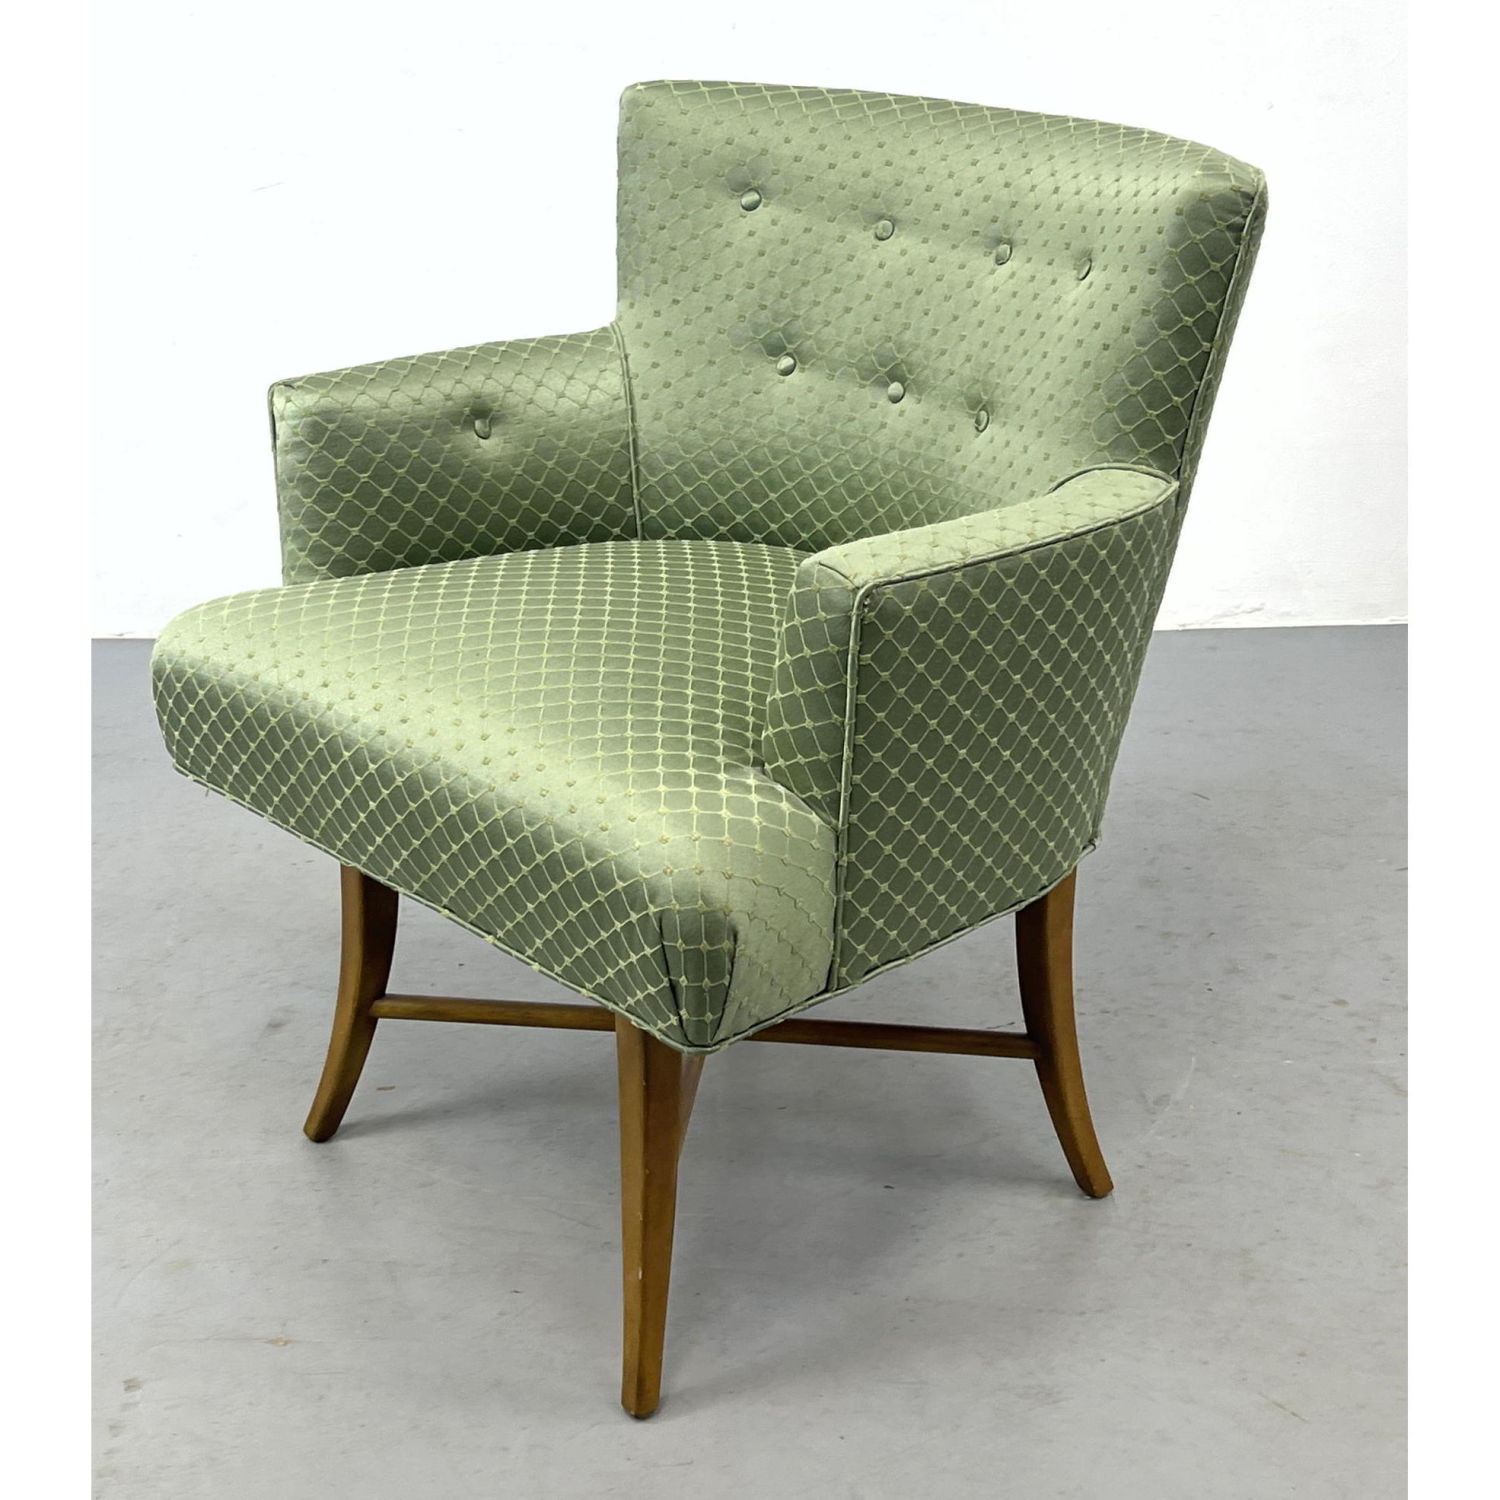 Upholstered Swivel Lounge Chair.